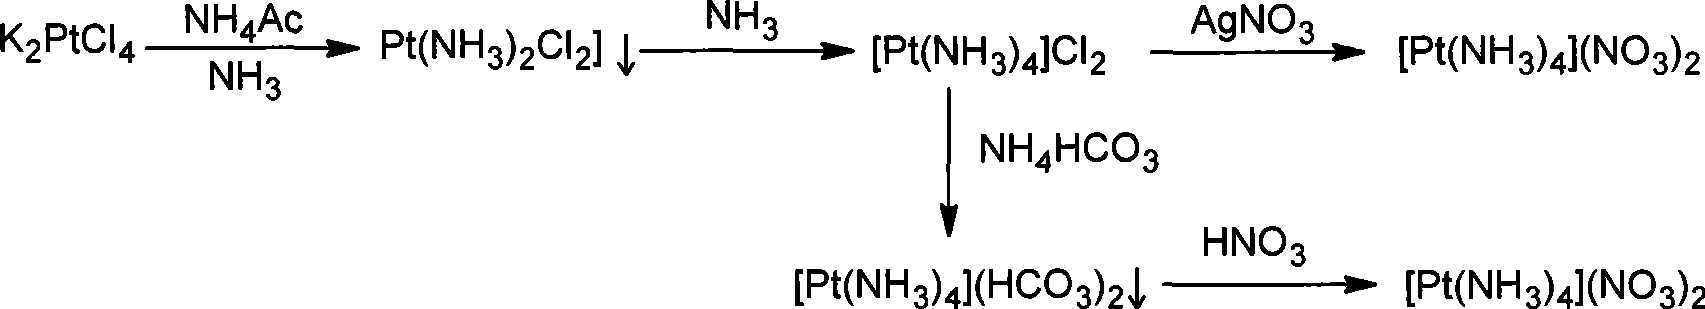 Novel method for synthesis of tetrammine platinum hydrogen nitrate (II)